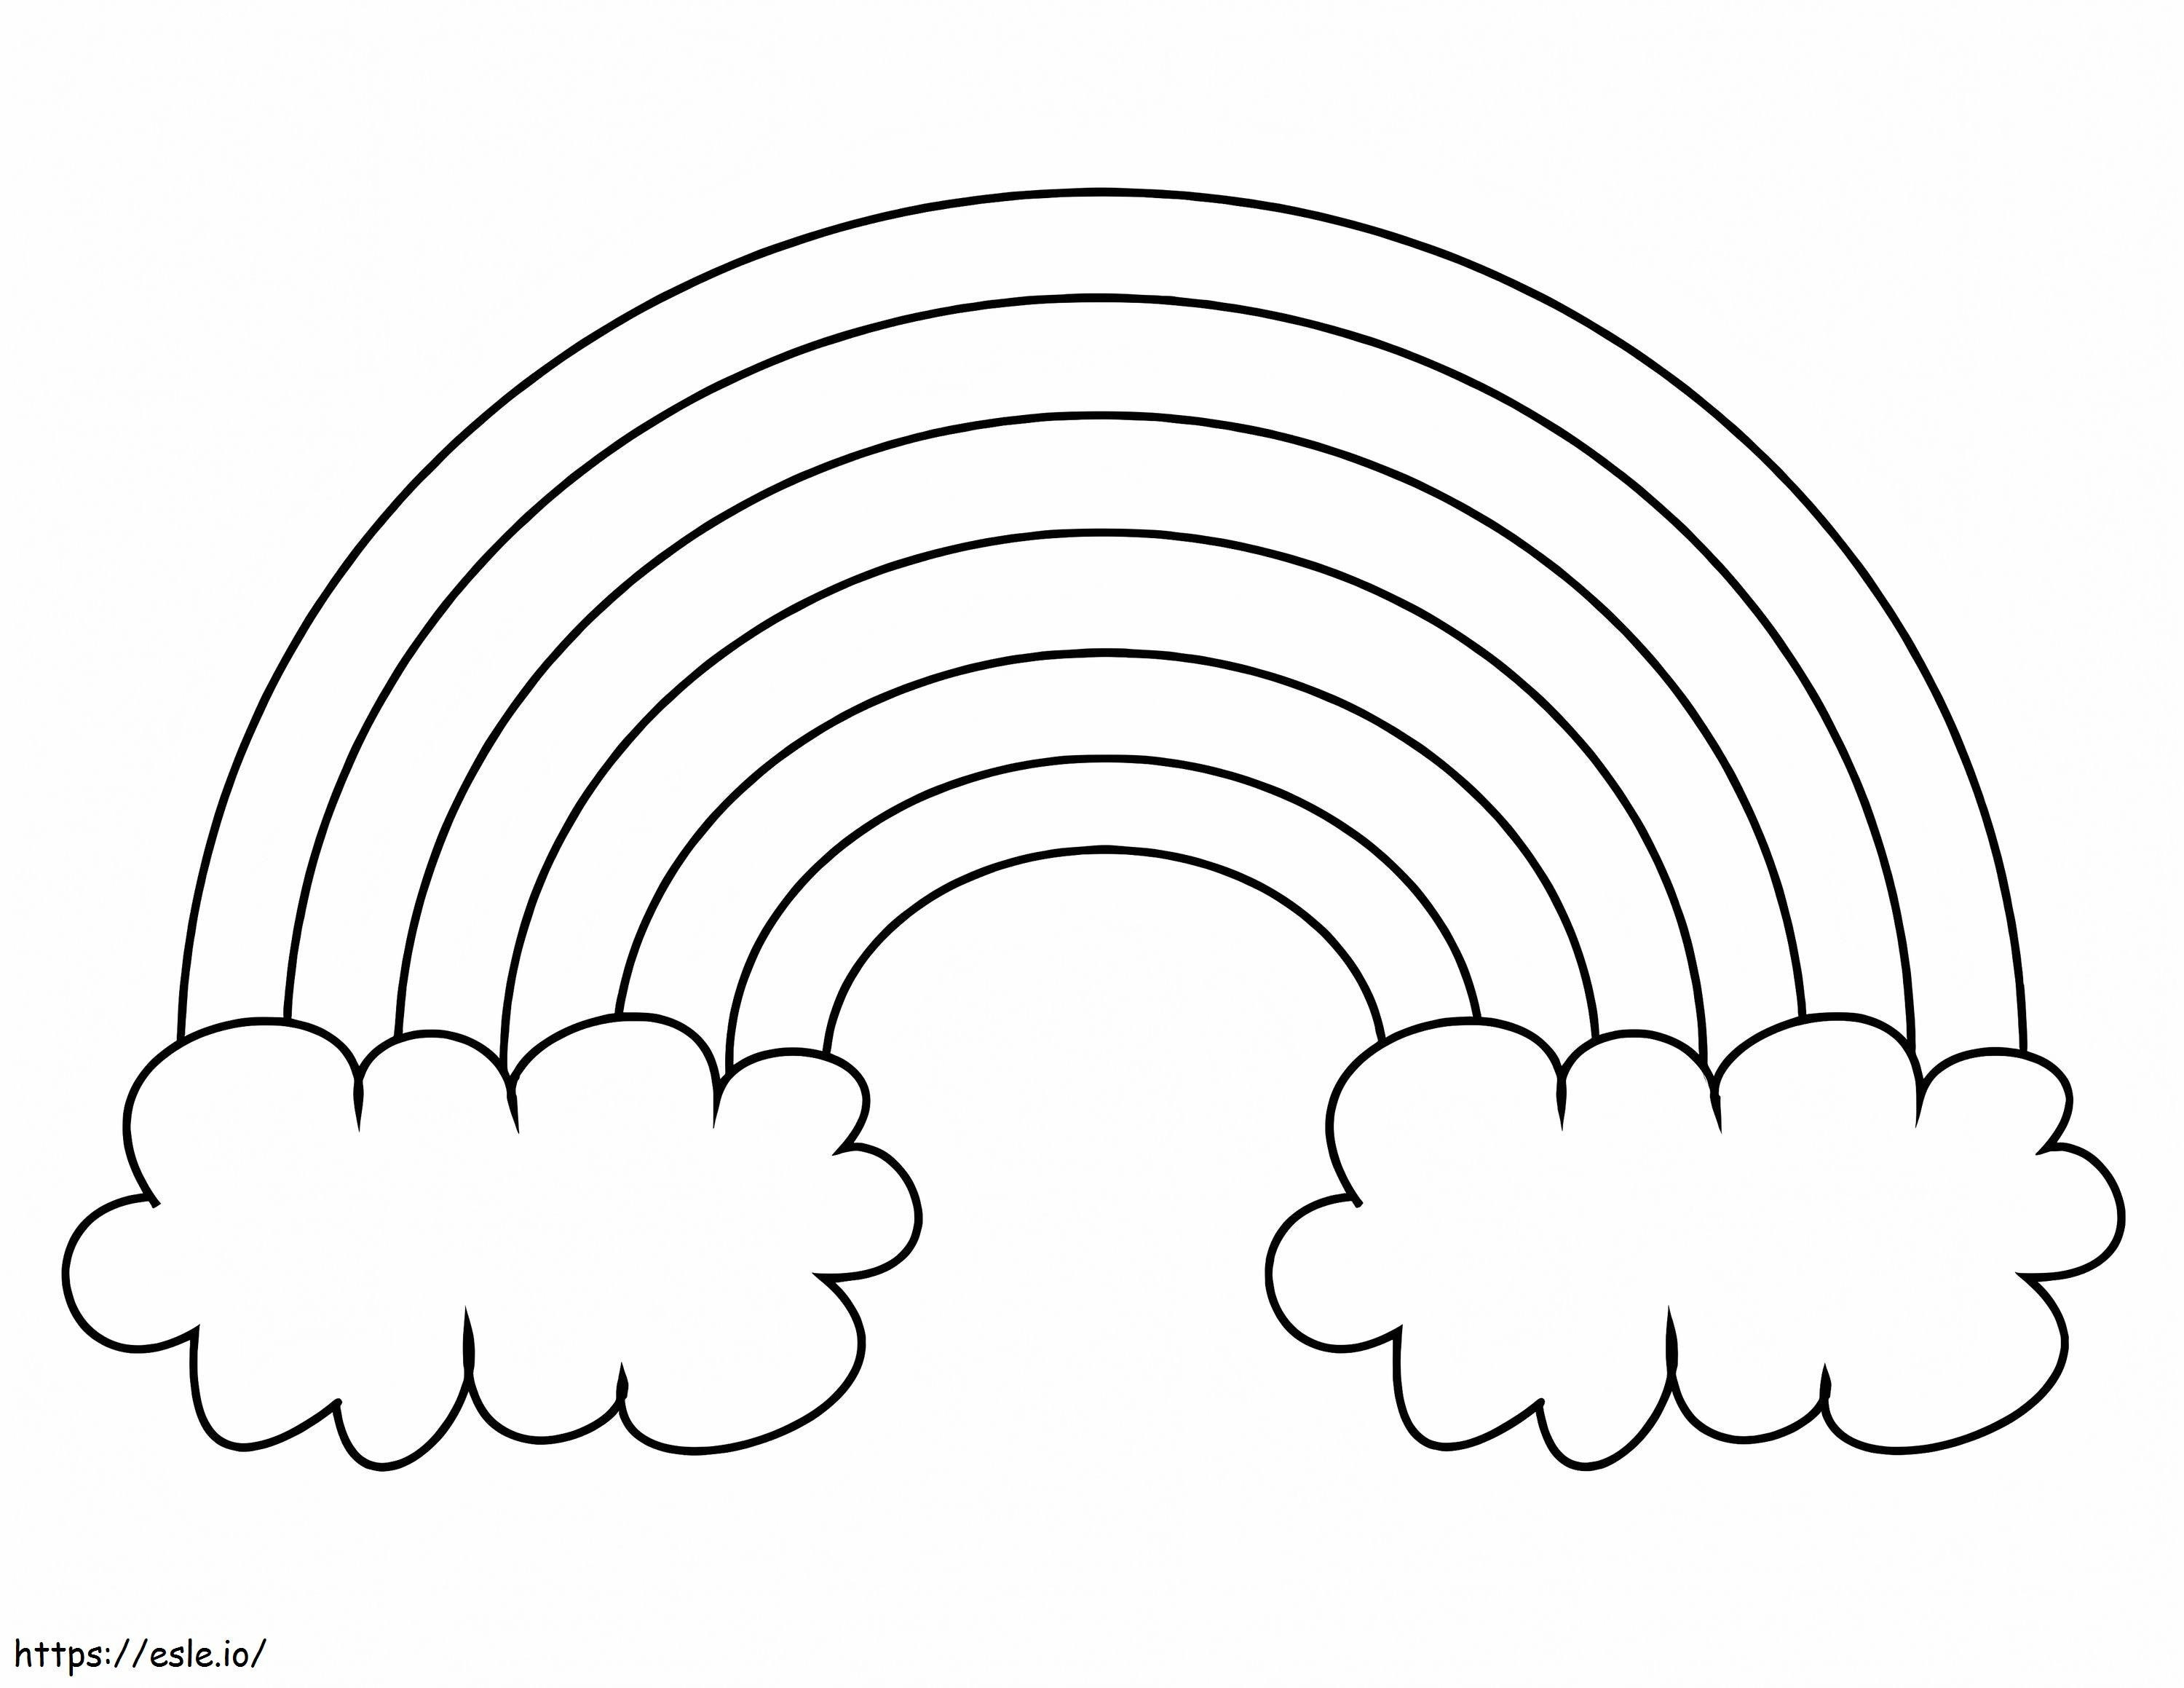 Rainbow With Two Clouds coloring page